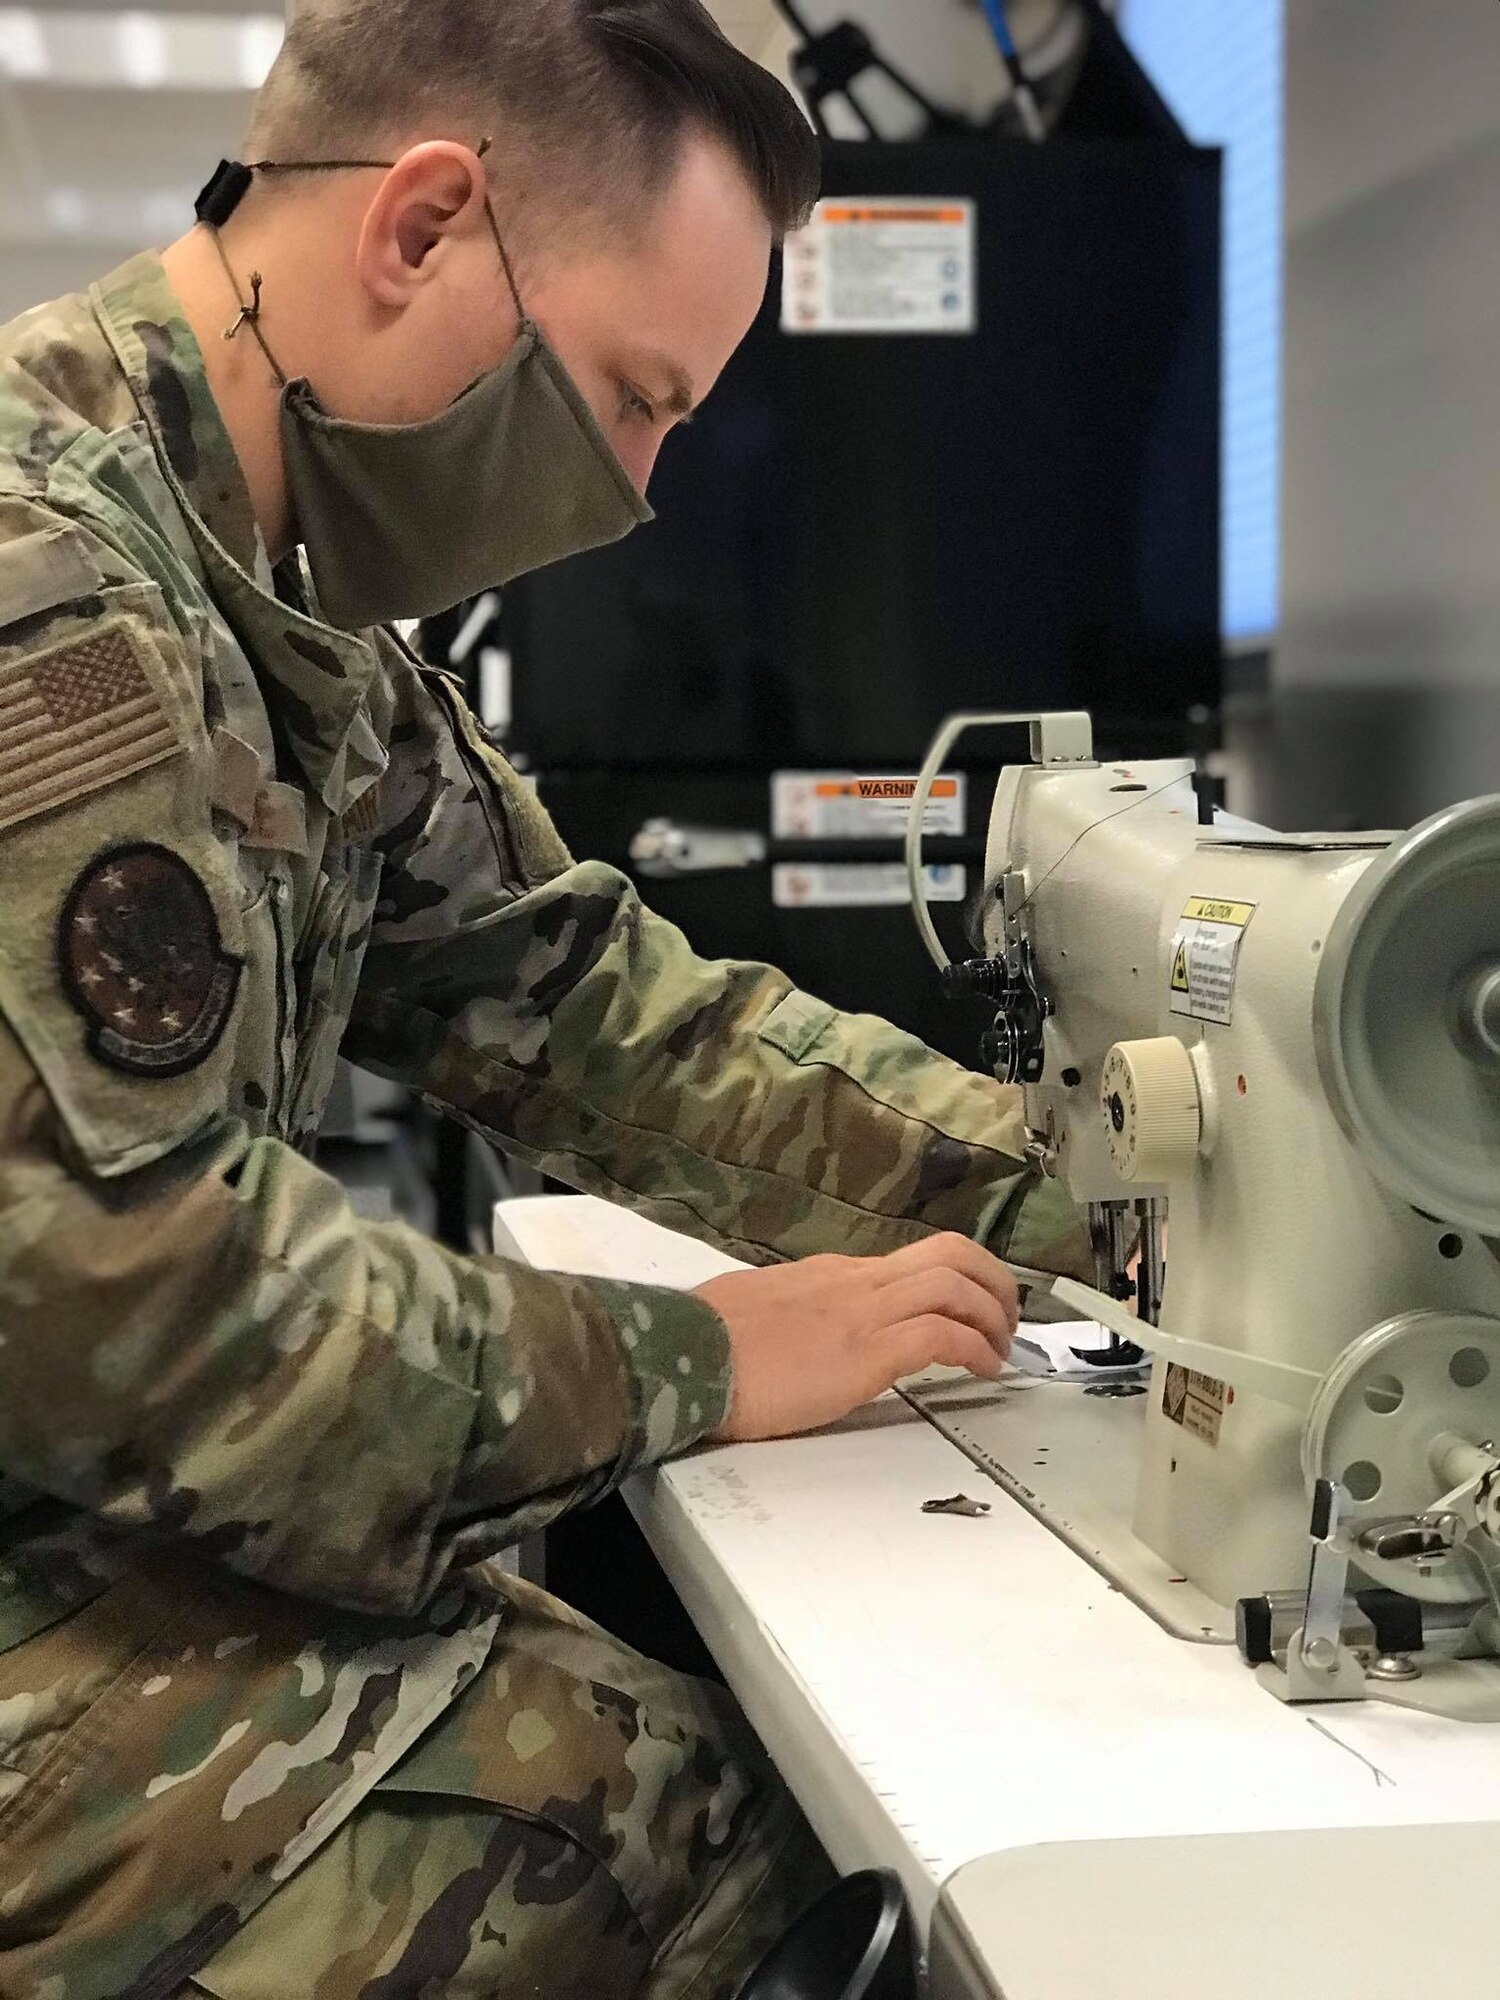 U.S. Air Force Staff Sgt. Jacob Wade, 52nd Operations Support Squadron NCOIC of aircrew flight equipment main shop, uses a sewing machine at Spangdahlem Air Base, Germany, April 13, 2020. Wade says “Providing relief to those who may not otherwise receive it is important to him during these uncertain times, and this was a great opportunity to strengthen the bond with the host nation community.” The 52nd Fighter Wing is doing everything possible to help minimize the spread of COVID-19 and is committed to limiting the spread in both the on and off-base community. (52nd Operations Support Squadron courtesy photo)